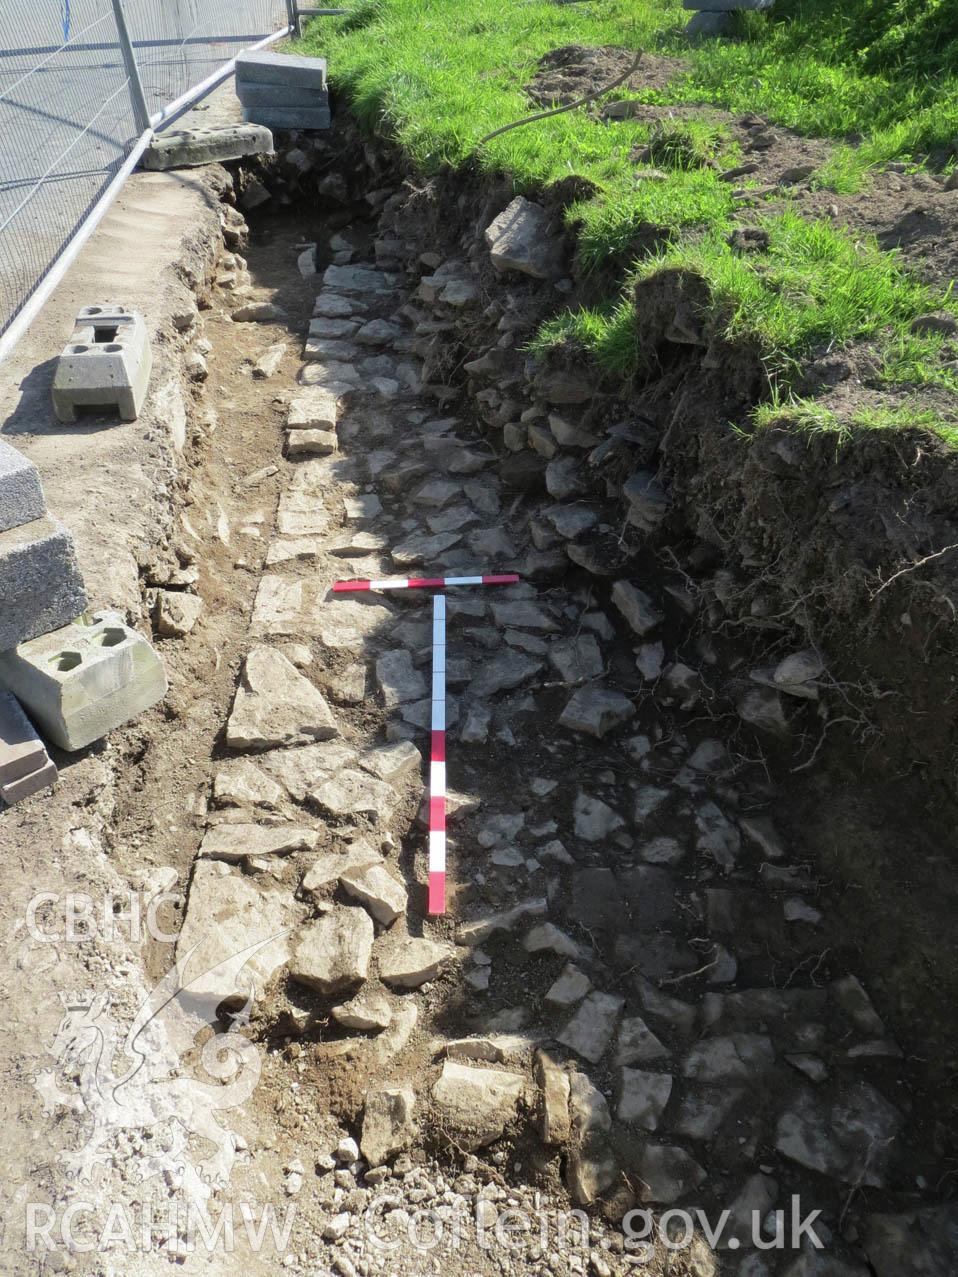 'Post-excavation shot of stone foundations at the north-east corner of the site. Scales: 1x0.5m & 1x1m. Looking south.' Photographed as part of Archaeological Watching Brief of Upper House Farm, Painscastle, by Archaeology Wales.